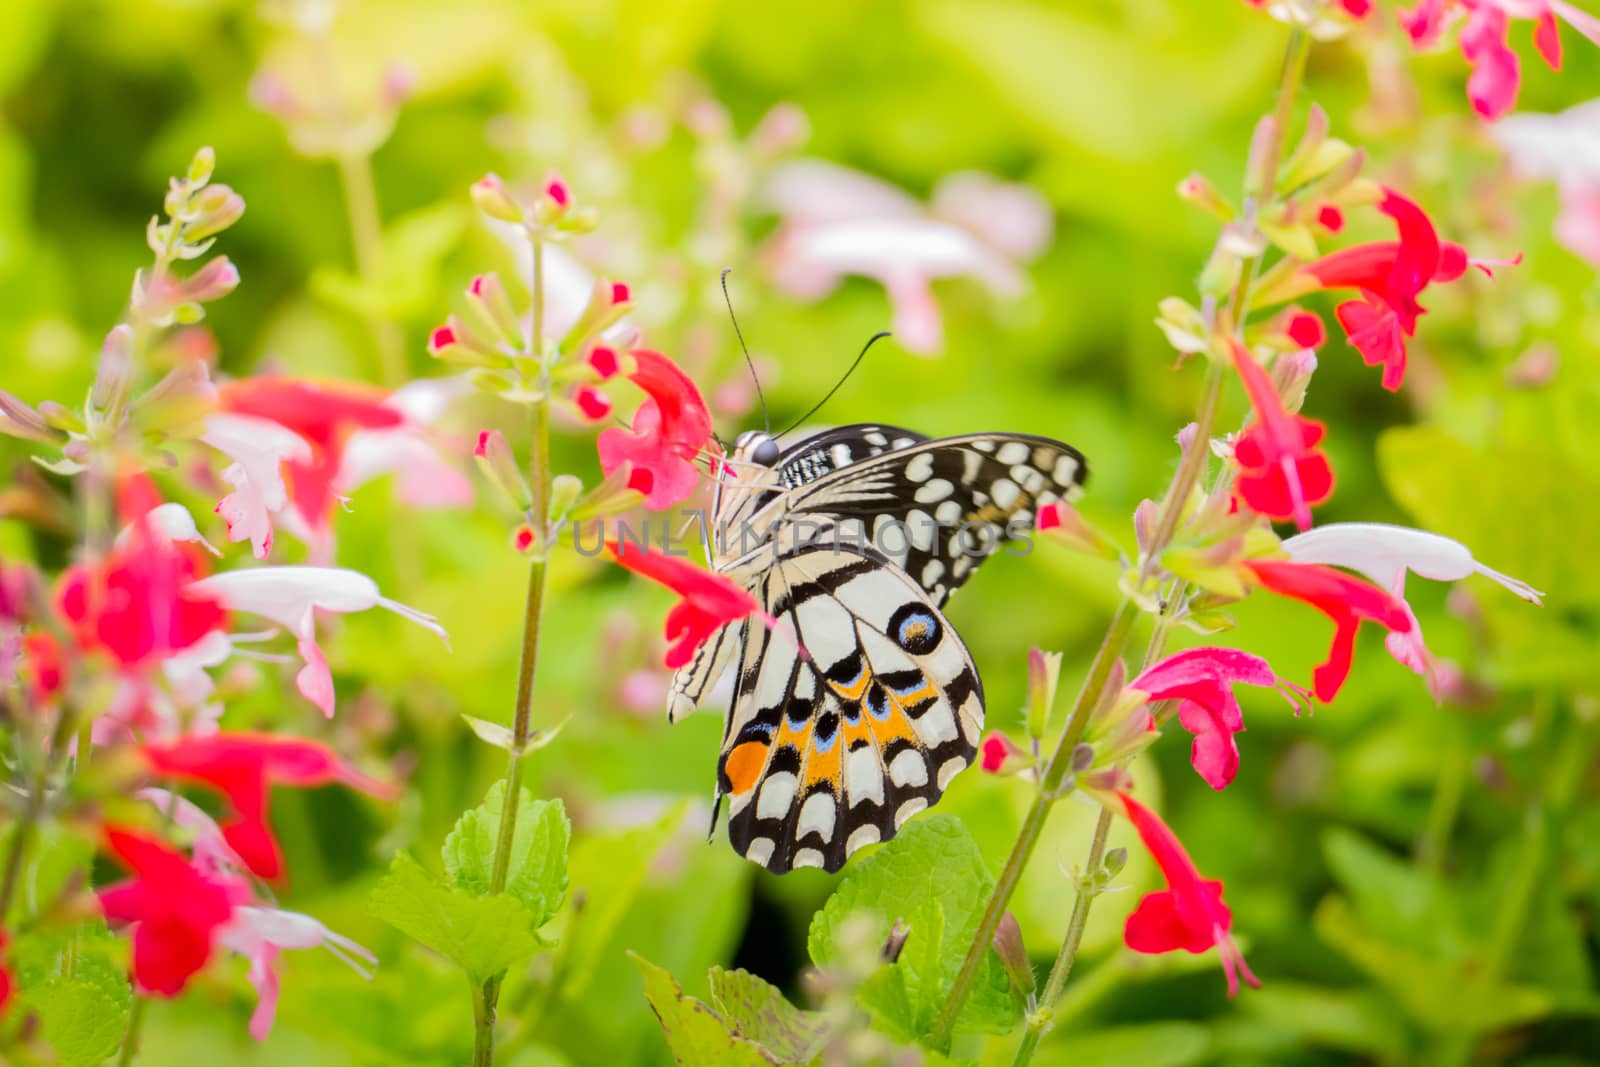 Beautiful Butterfly on Colorful Flower, nature background